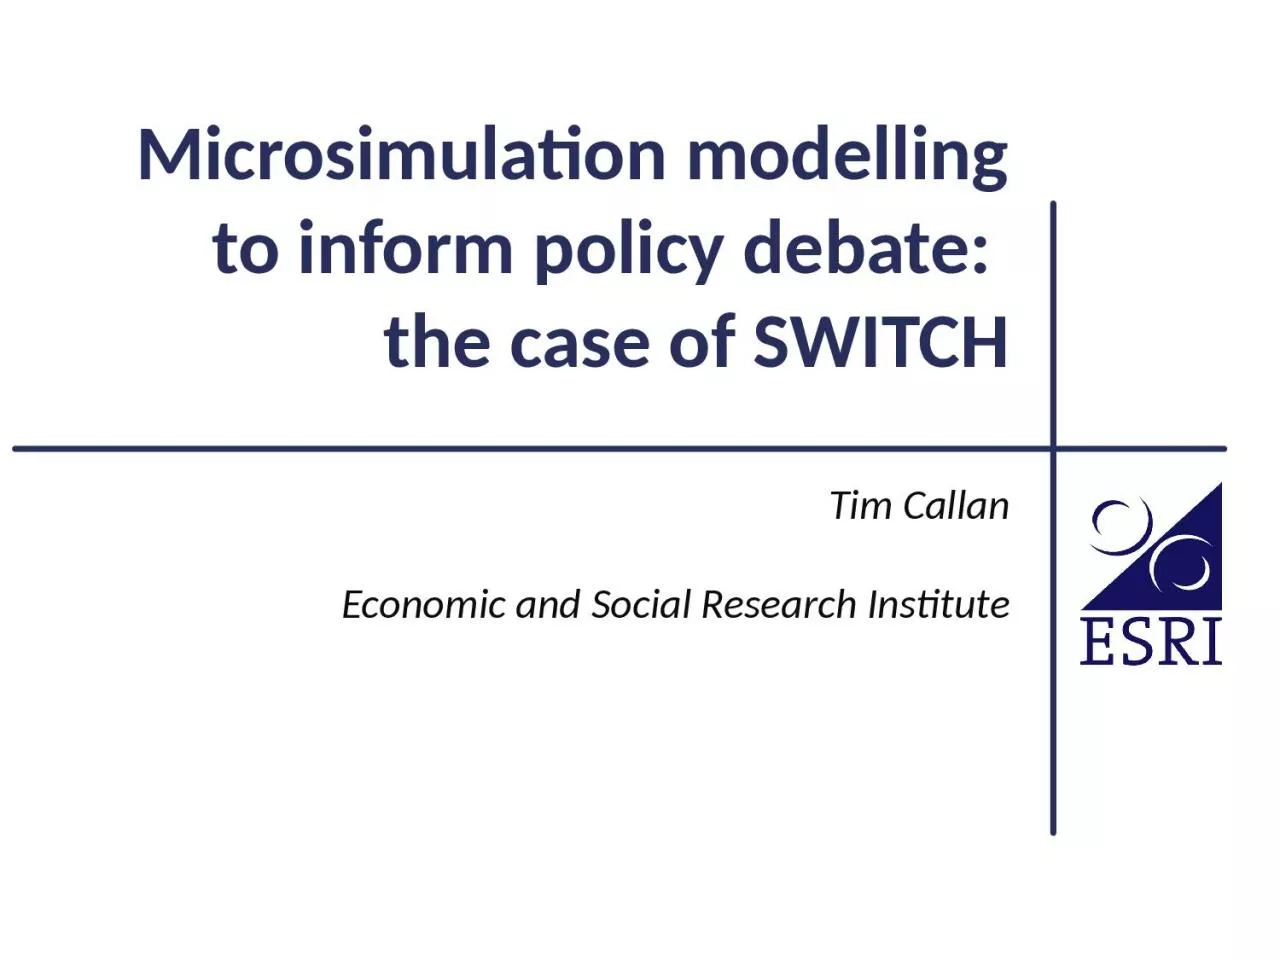 Microsimulation modelling to inform policy debate: